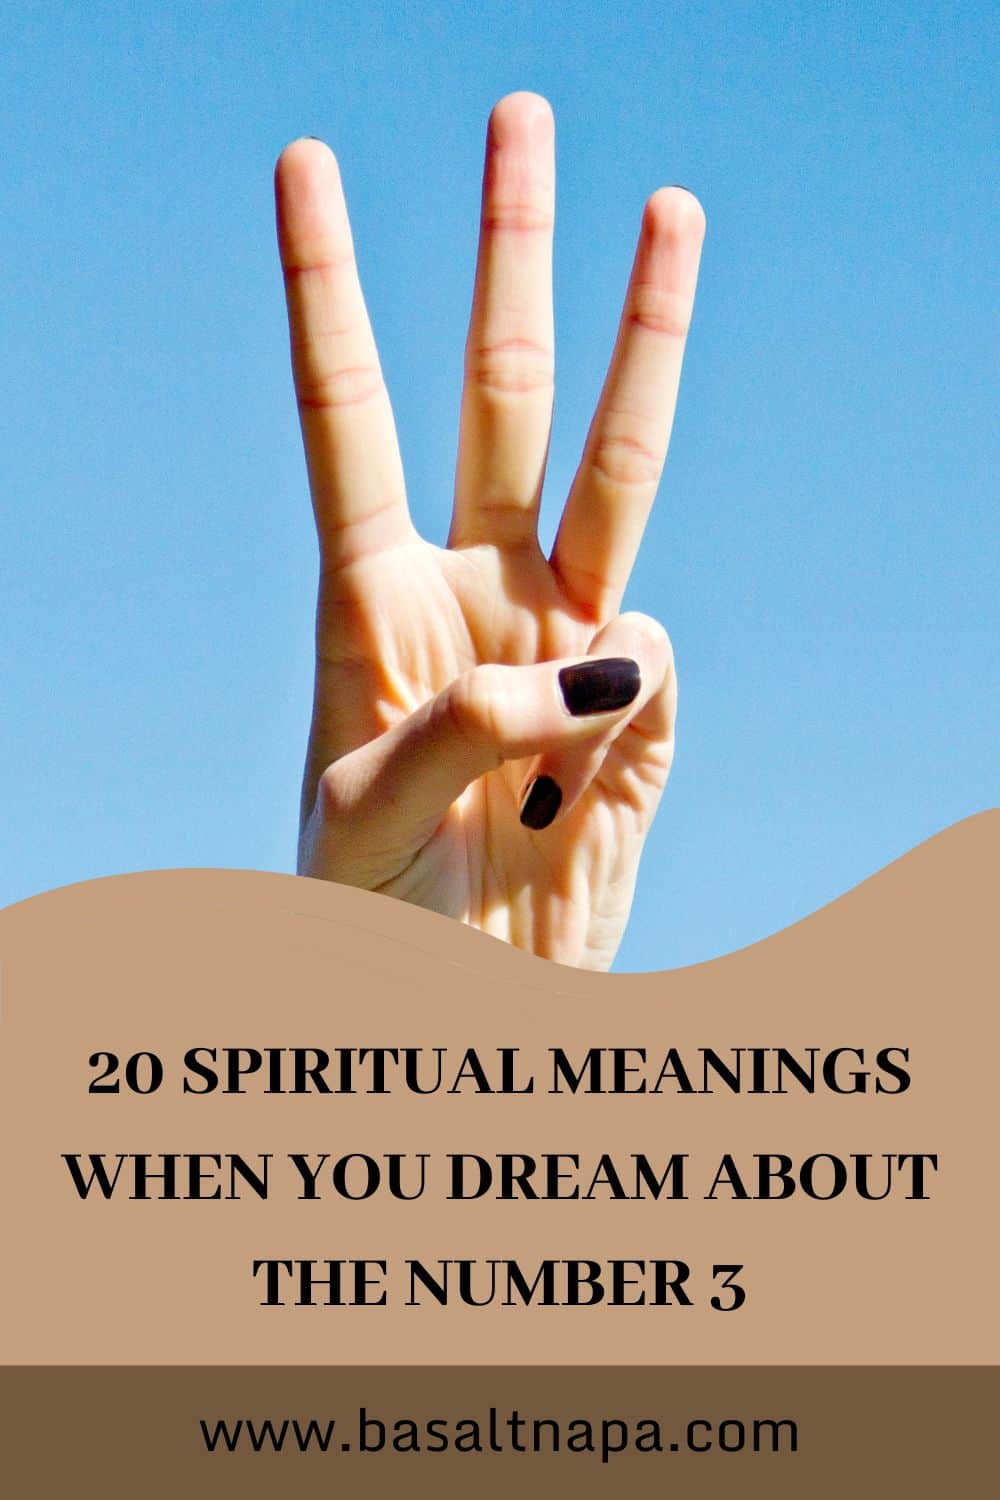 20 Spiritual Meanings When You Dream About the Number 3